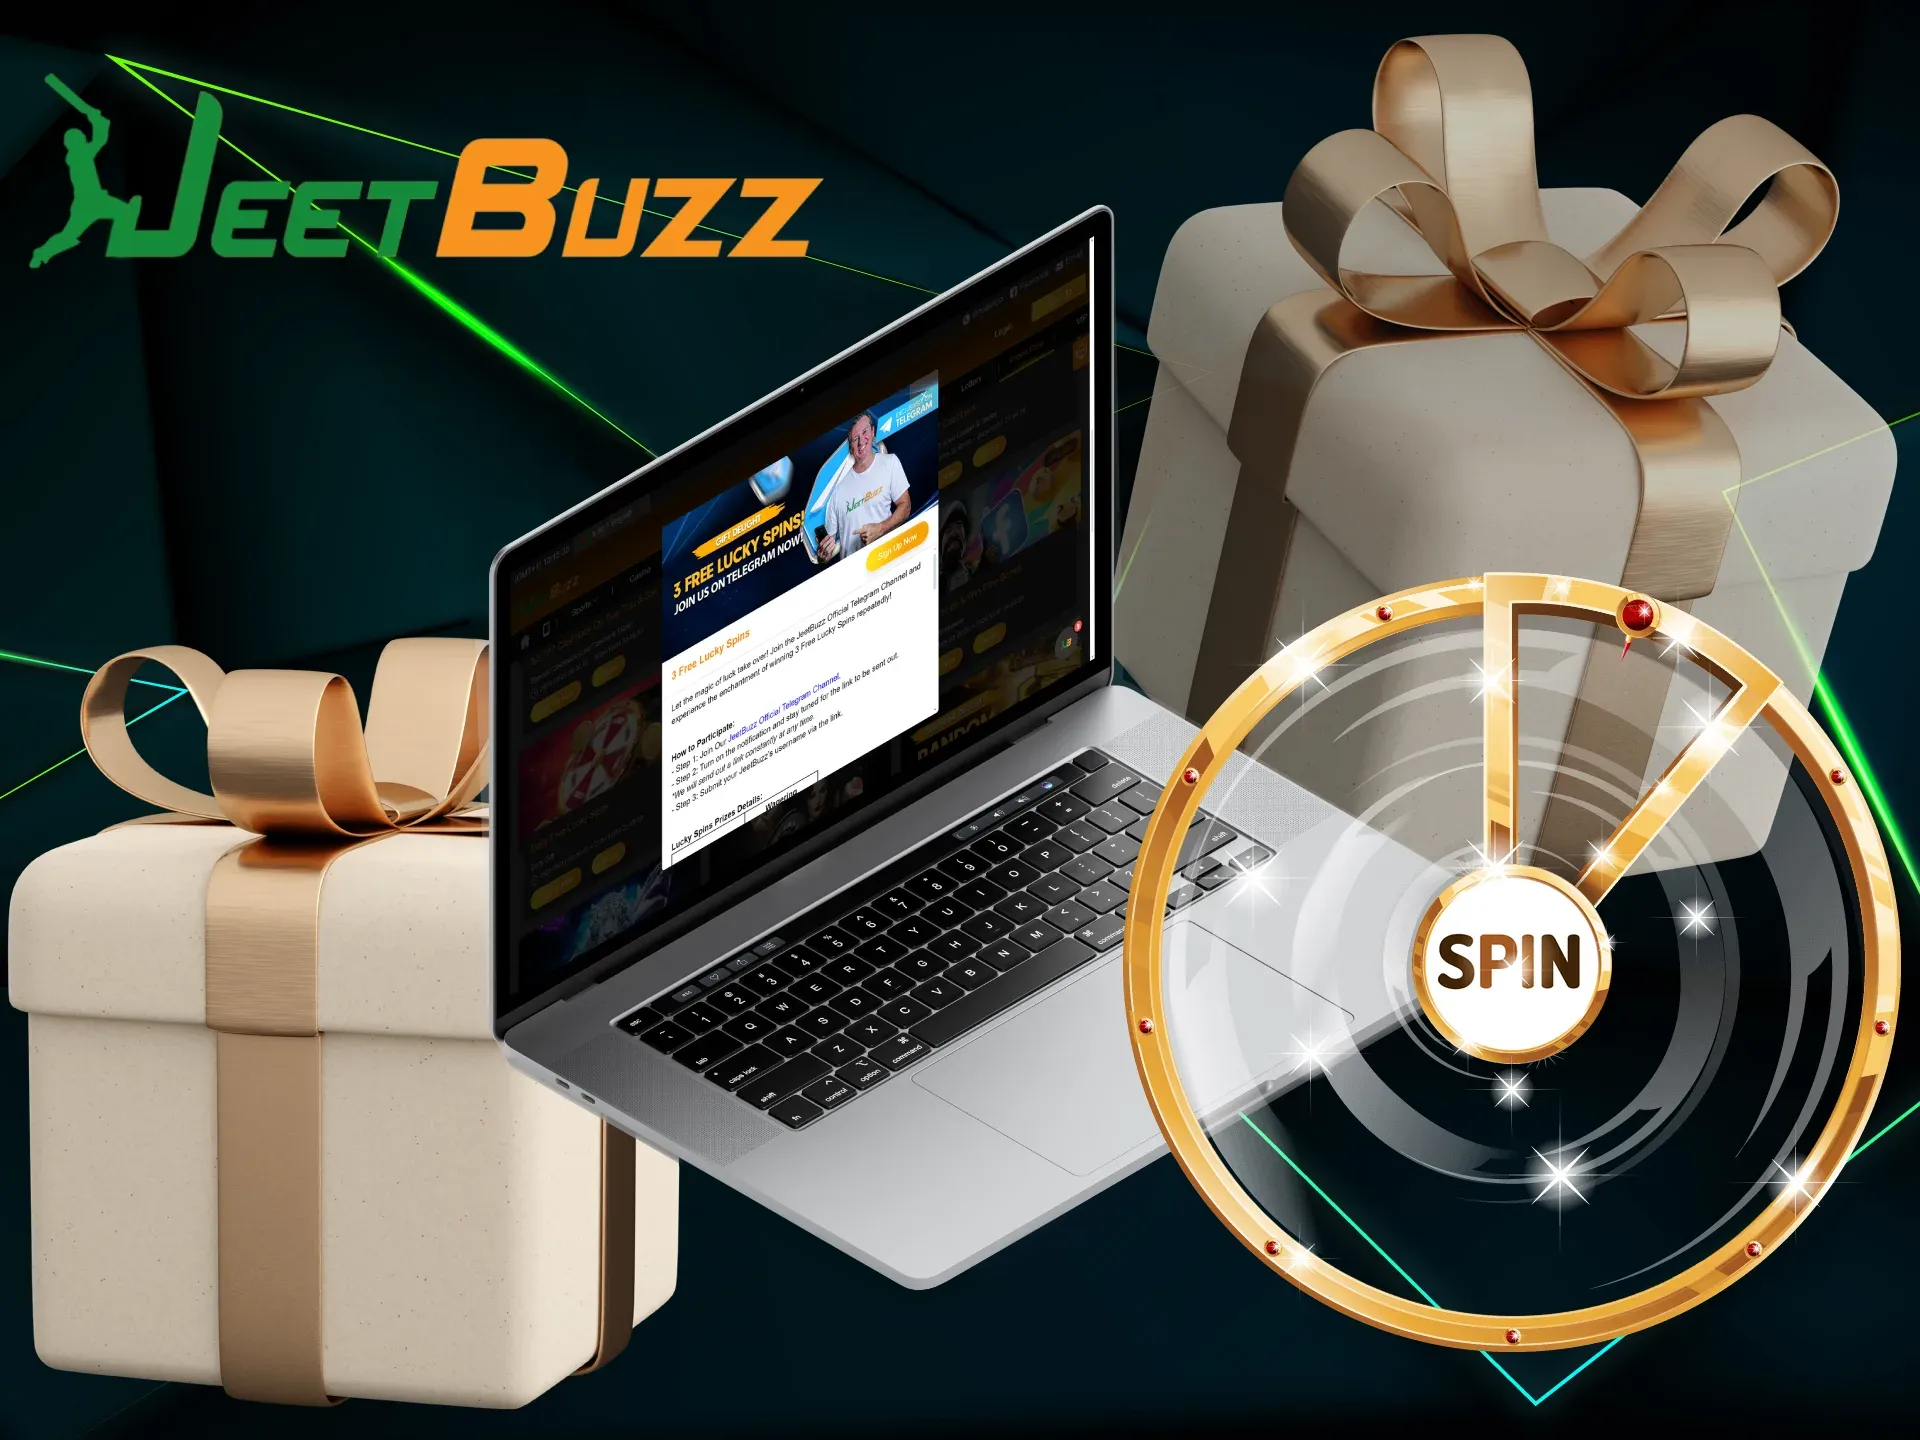 Three Free Lucky Spins allow you to win exciting bonuses.